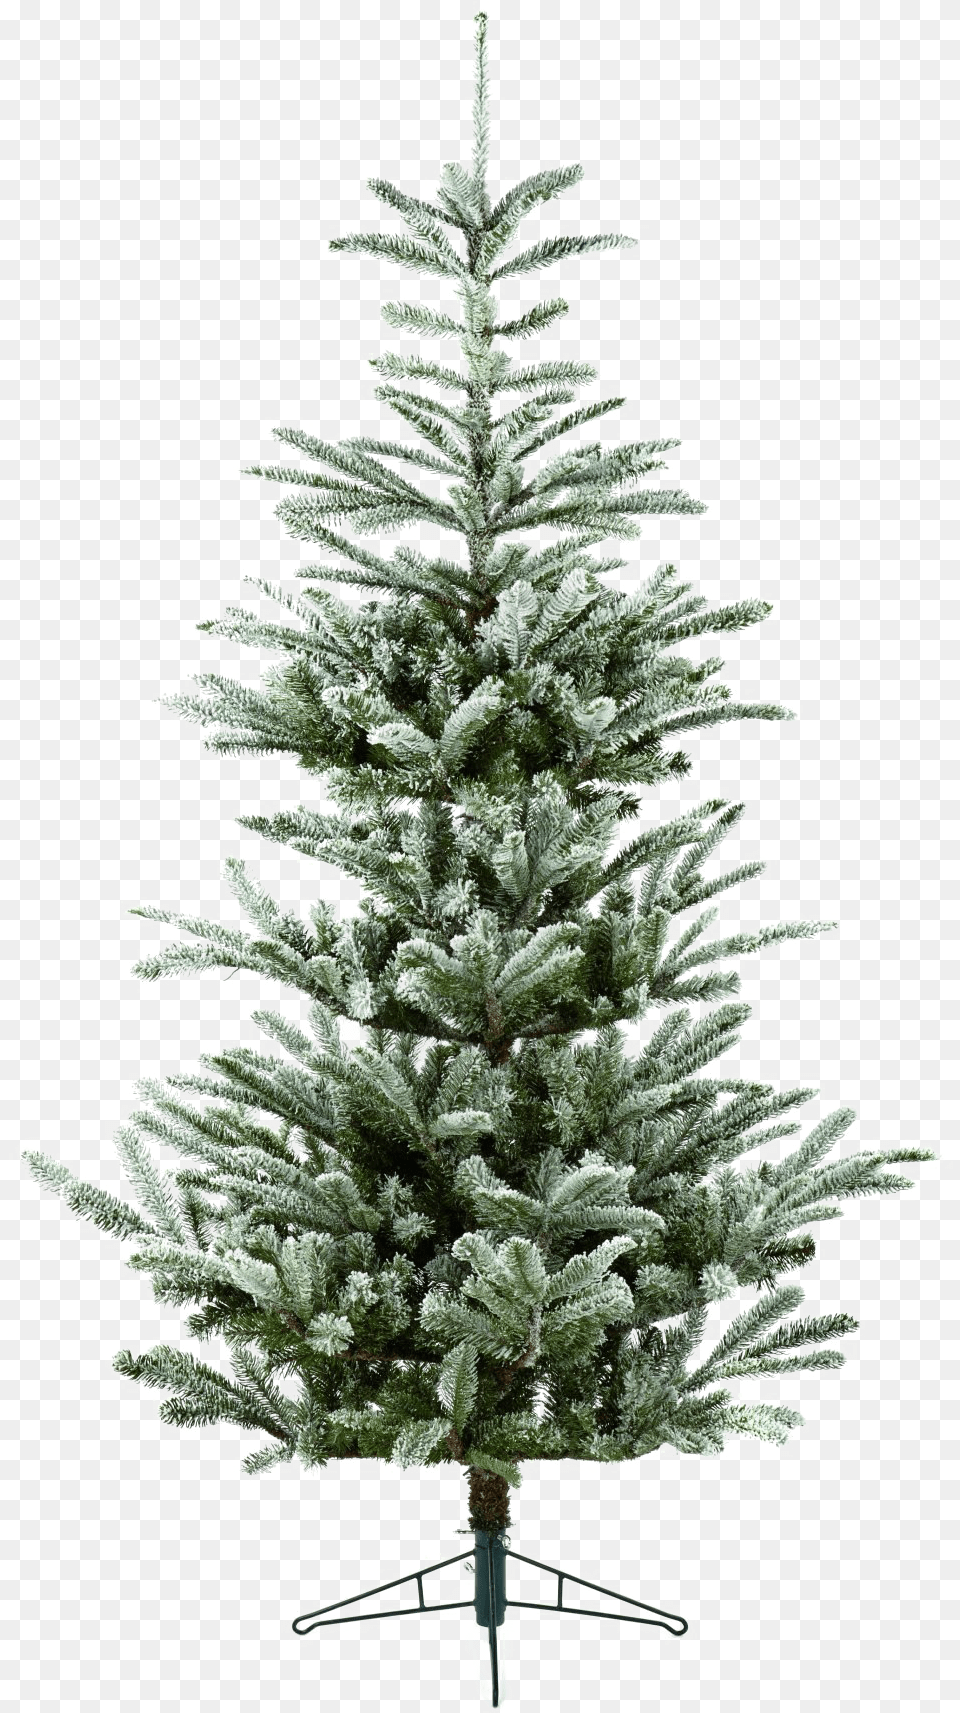 Fir Tree Download Transparent Christmas Tree, Pine, Plant, Christmas Decorations, Festival Png